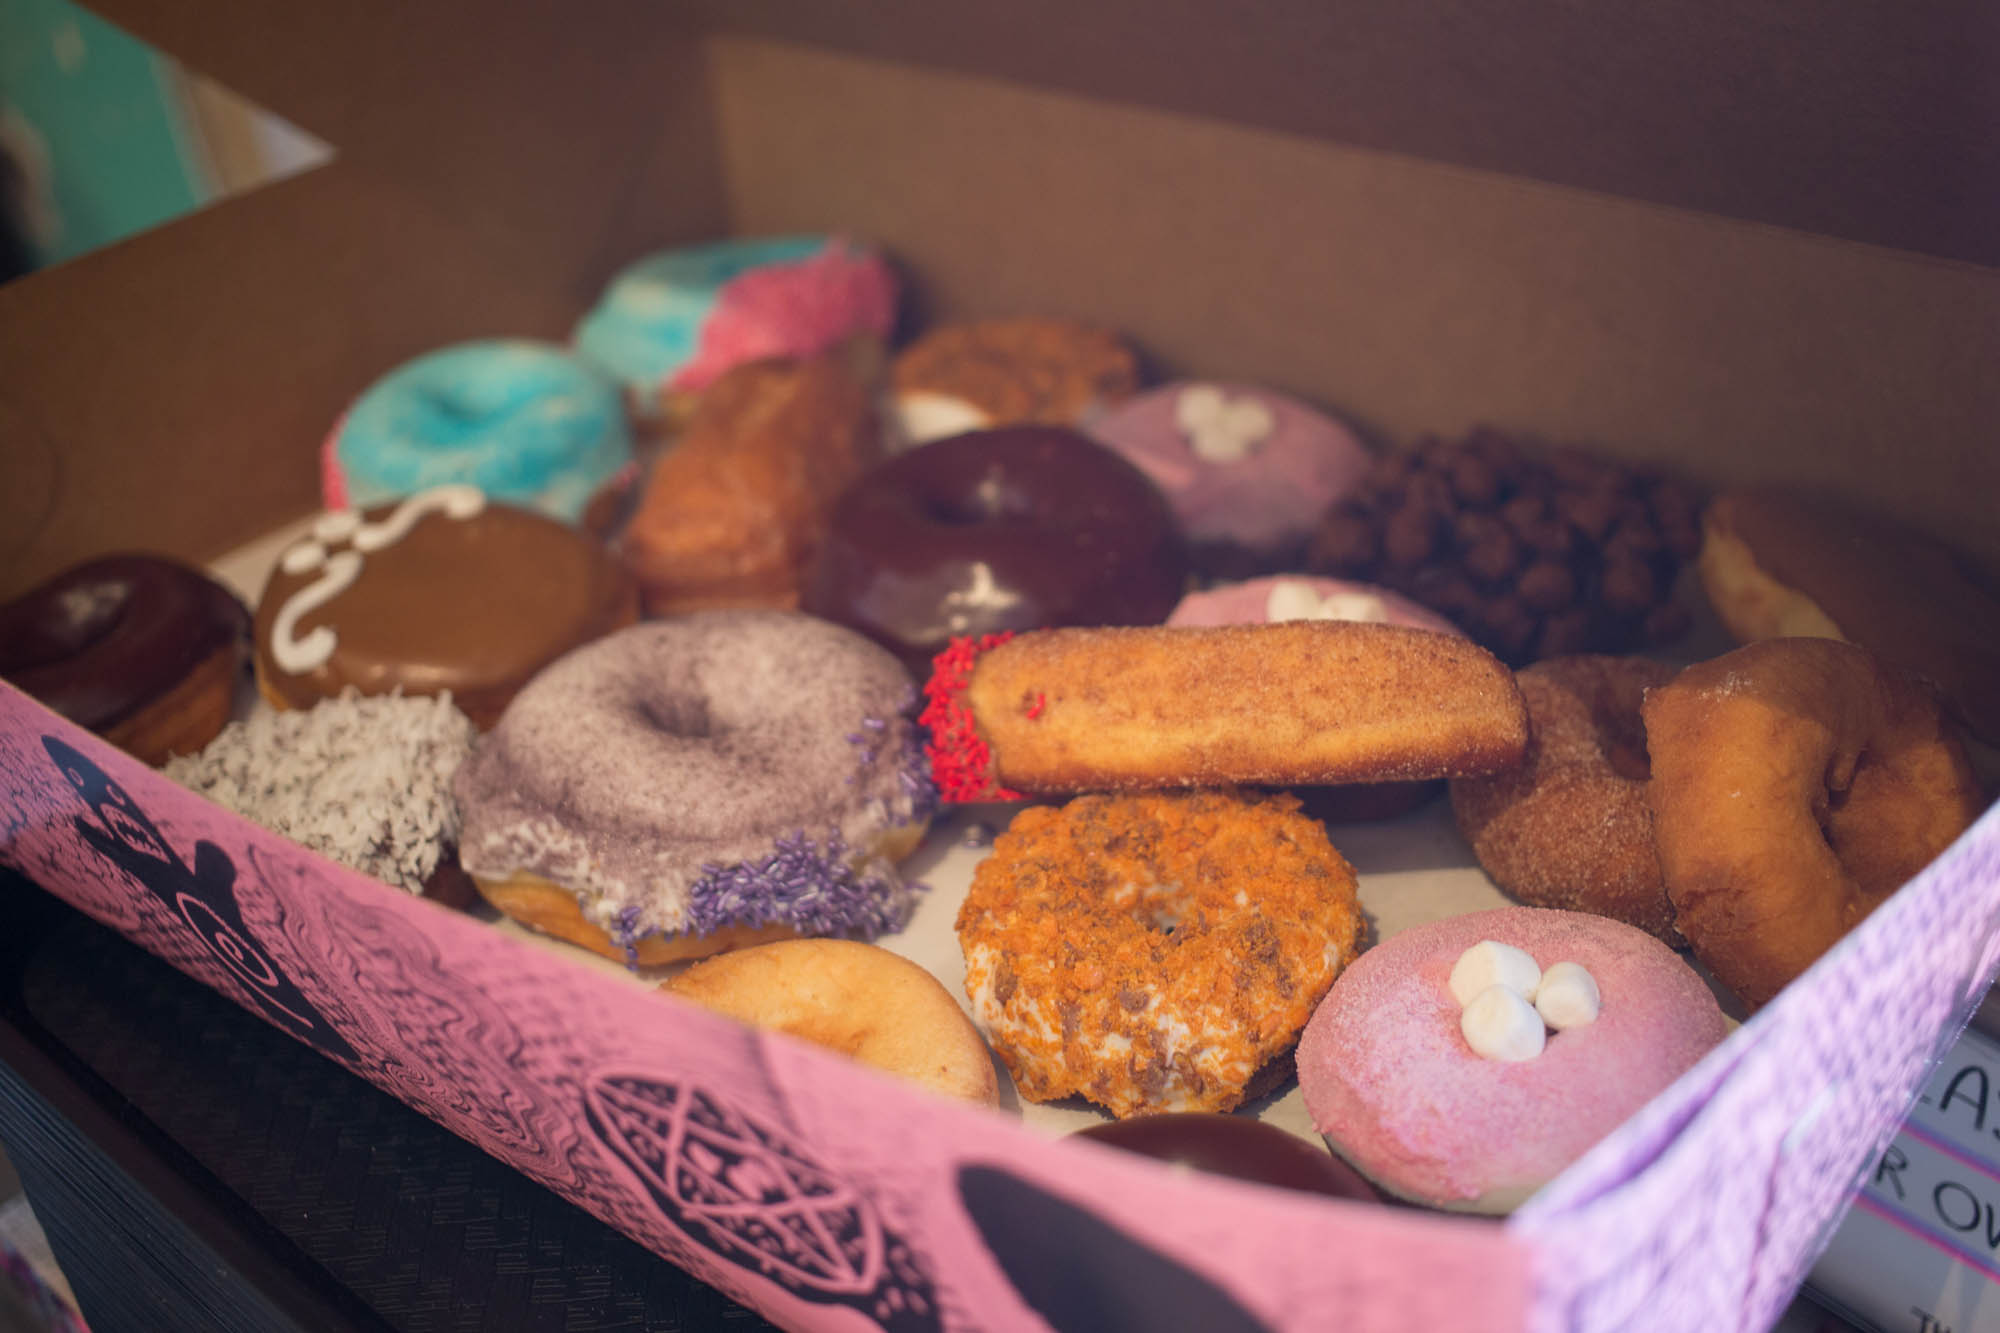 Voodoo Doughnuts supplied SXSW attendees with daily free doughnuts and coffee to jumpstart their morning. 